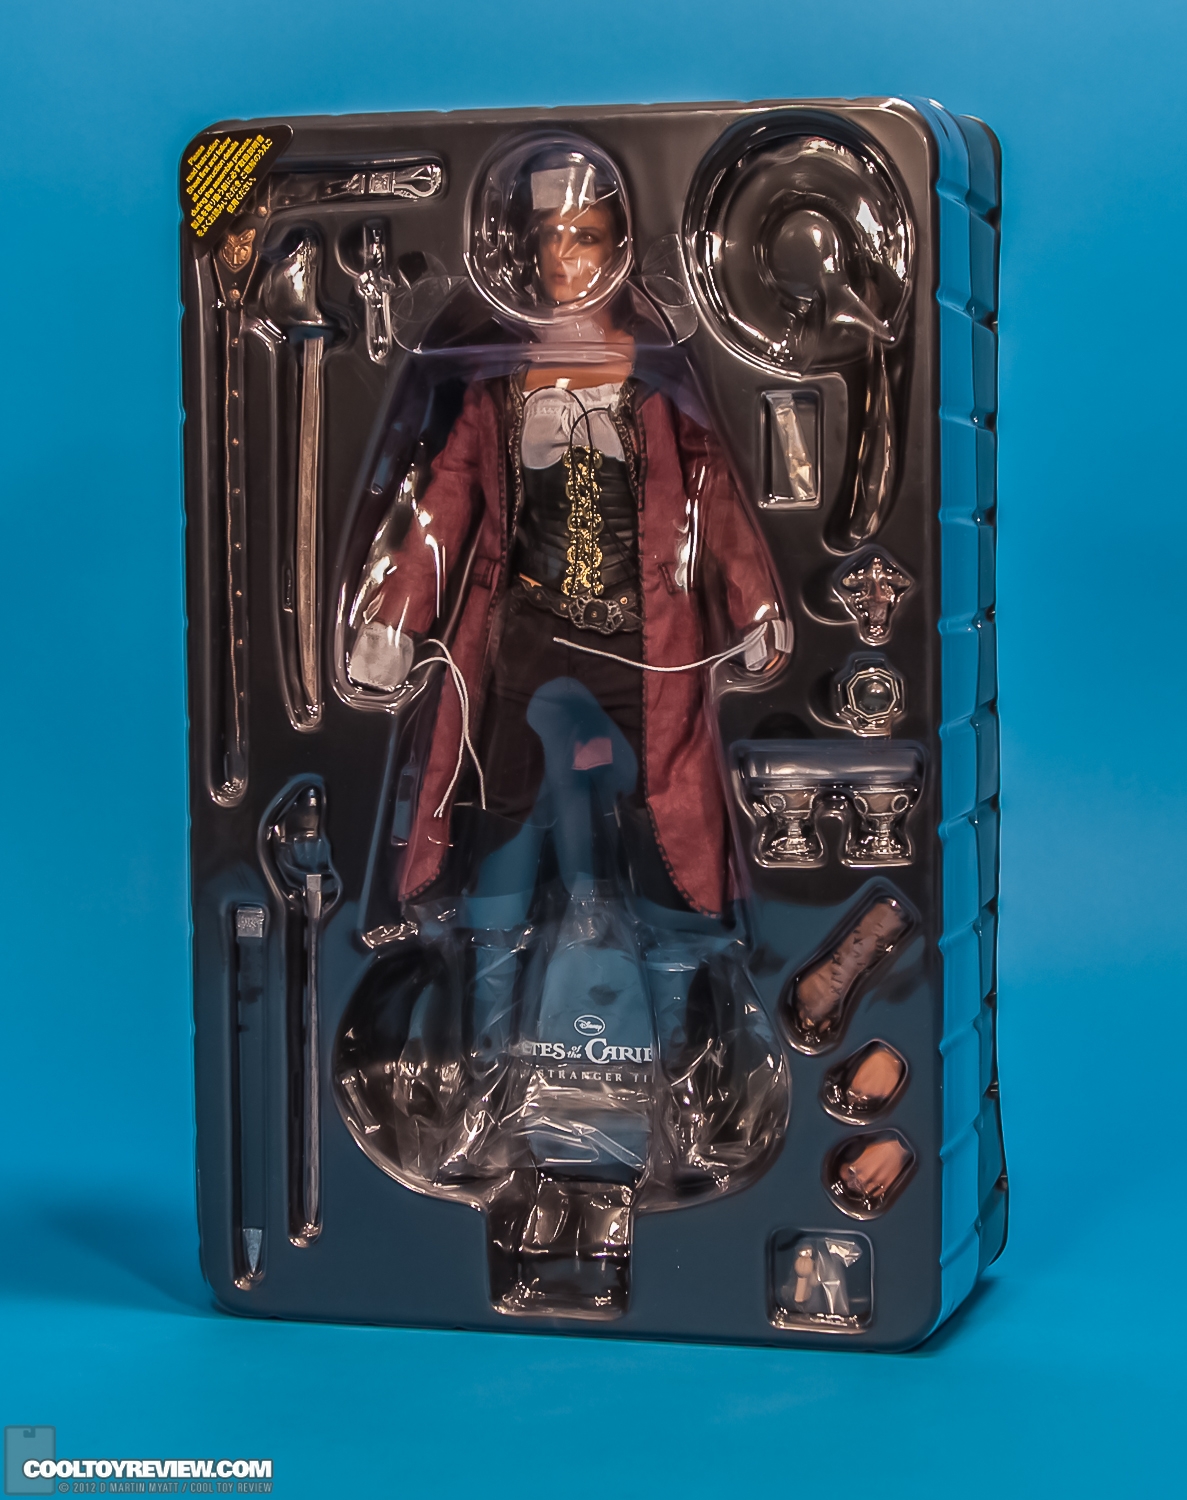 Angelica_Disney_Pirates_Of_The_Caribbean_Hot_Toys-53.jpg